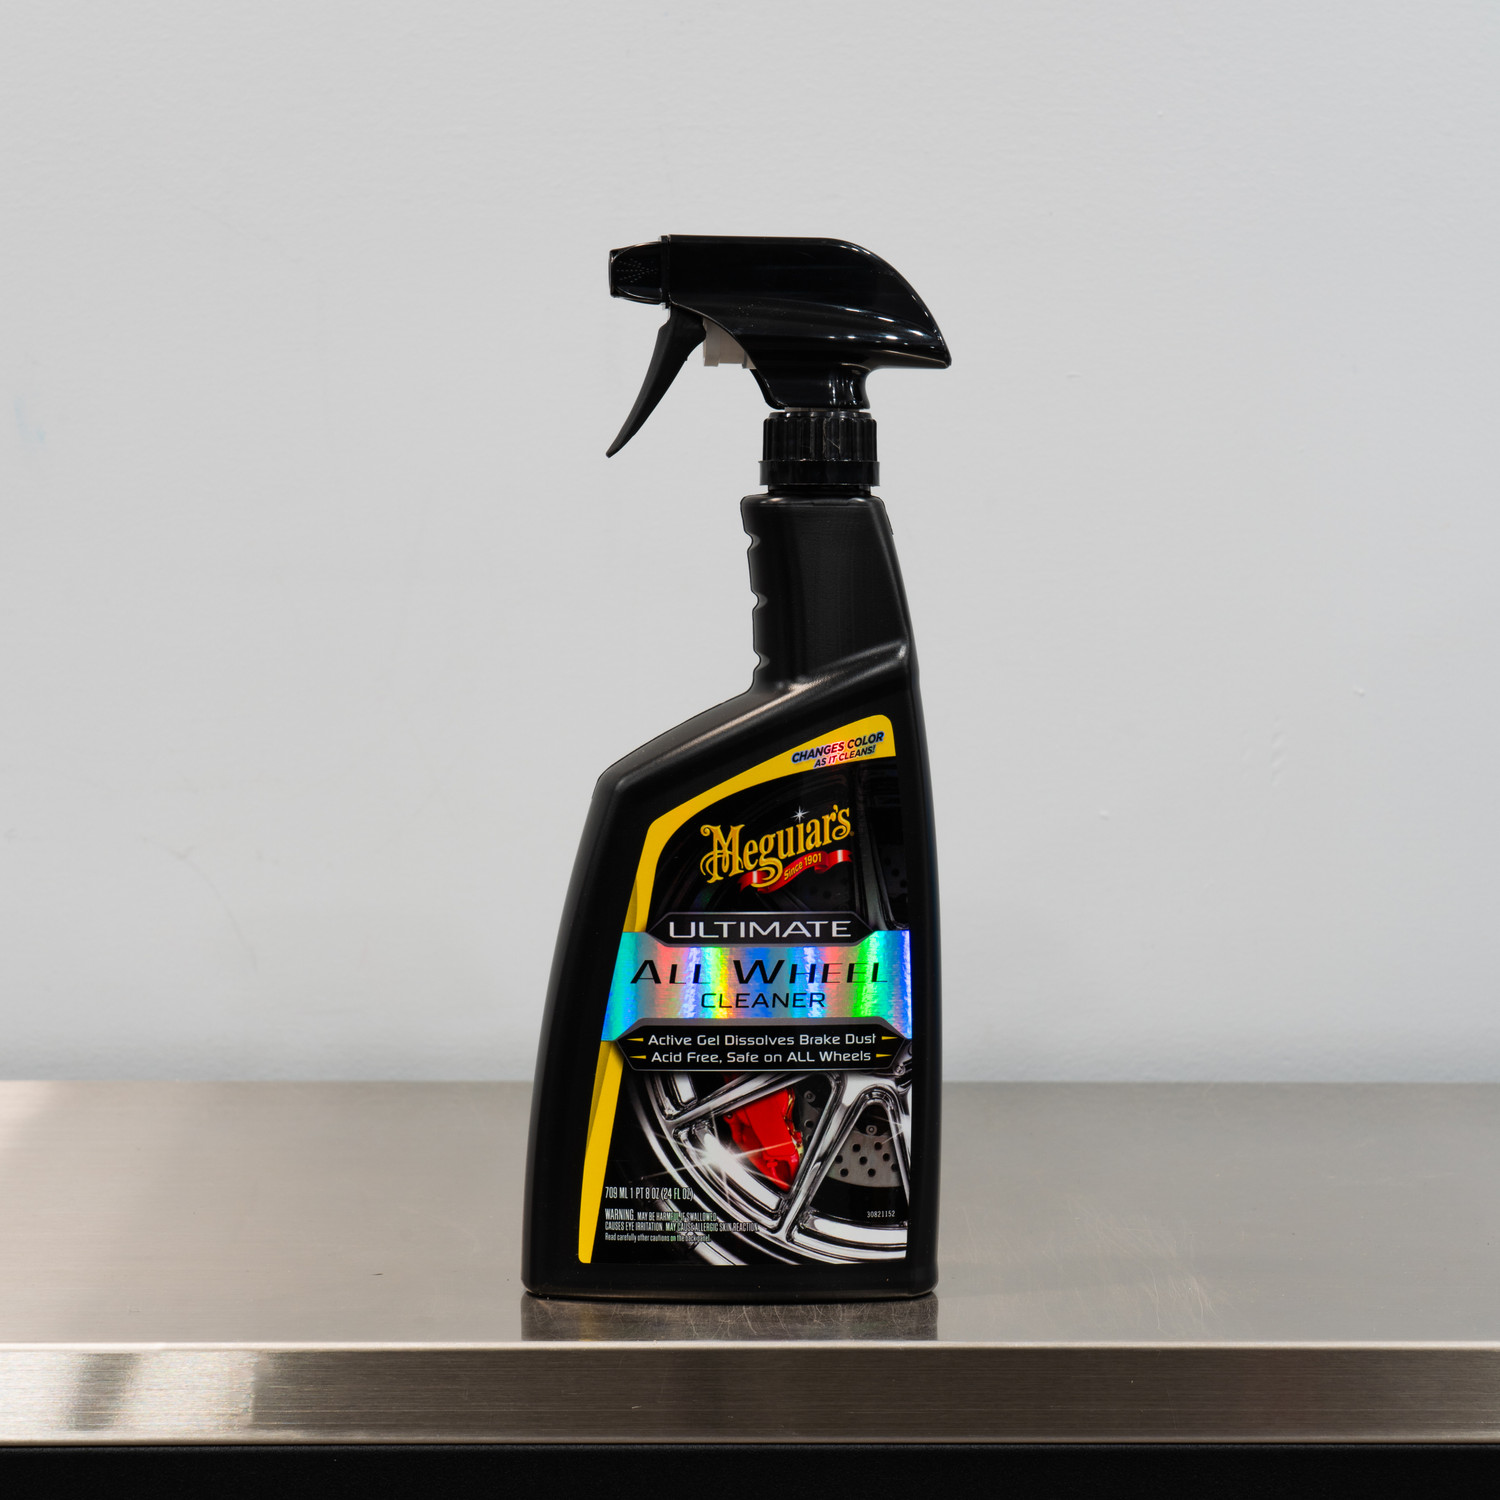 Meguiar's Ultimate All Wheel Cleaner - The Most Powerful Wheel